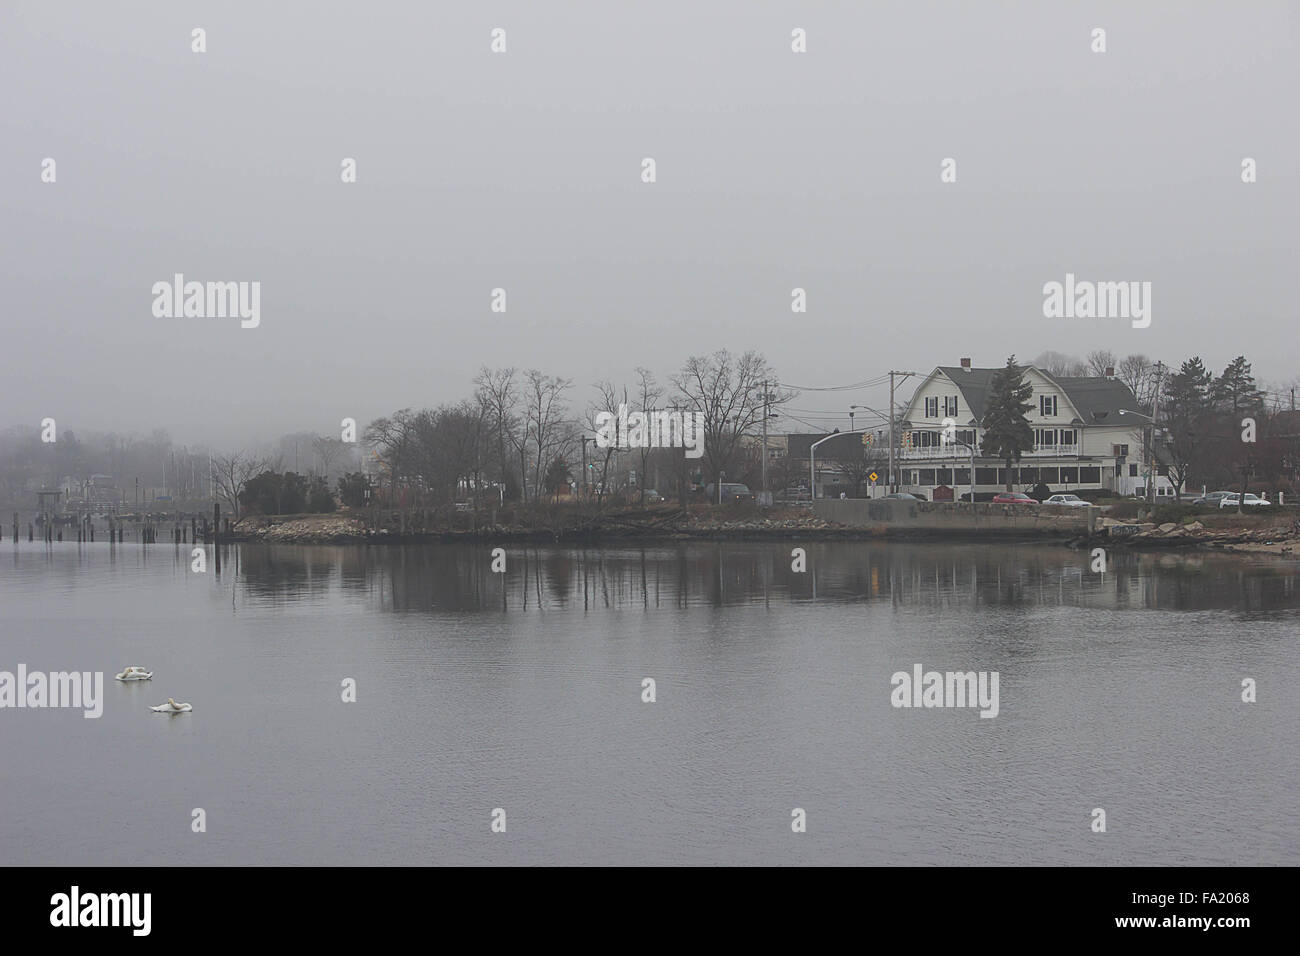 Foggy Days- An image showing a landmass with two swans on the waterfront at Manorhaven Isle New York Winter 2015 Stock Photo